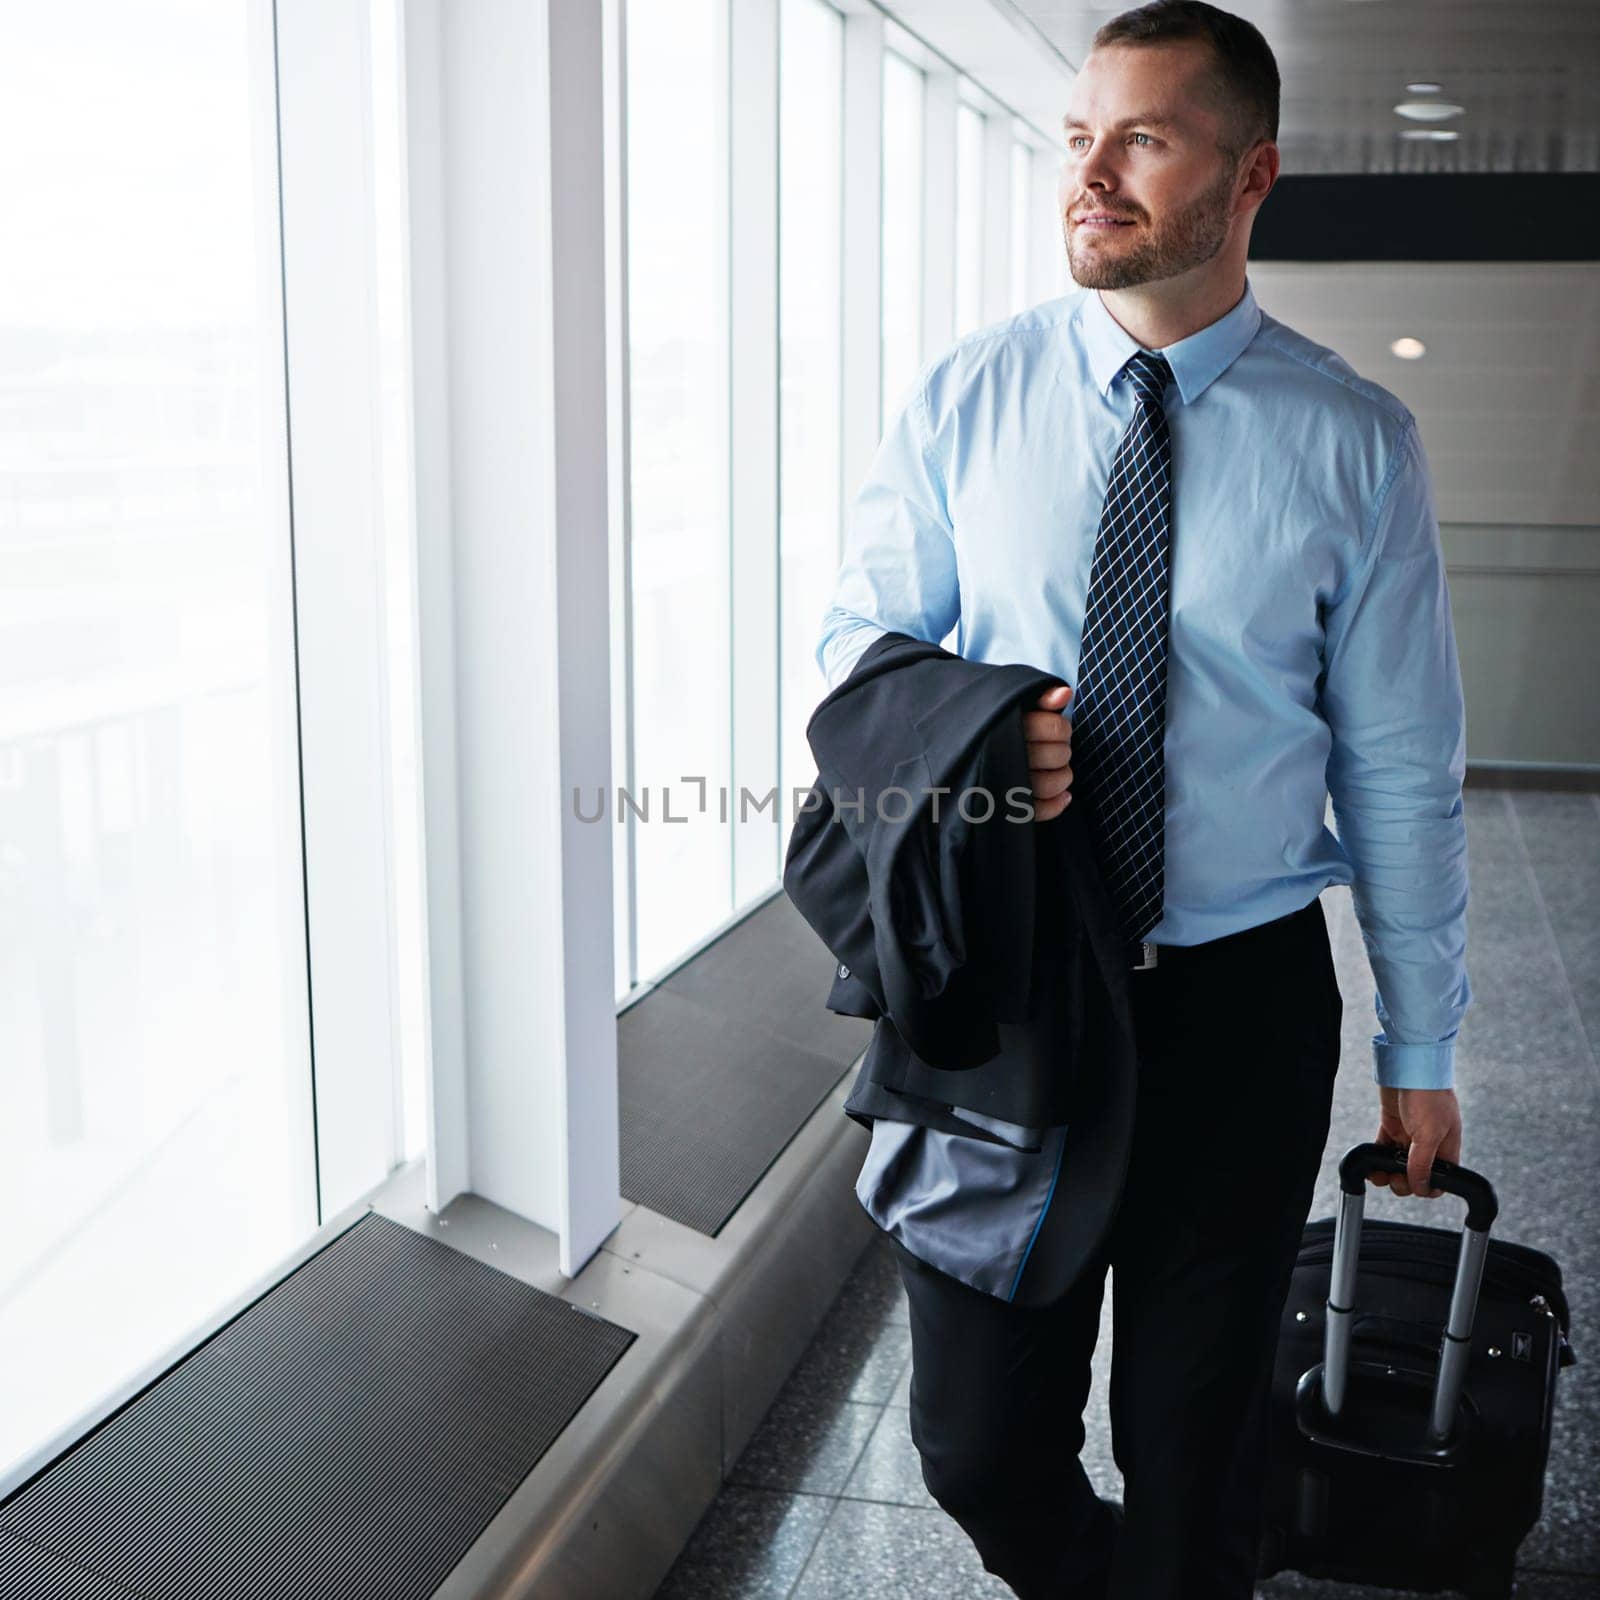 Walking, flight or businessman in airport thinking of company trip with suitcase or luggage for commute. Proud manager, idea or corporate worker in hall for journey or international travel by window by YuriArcurs